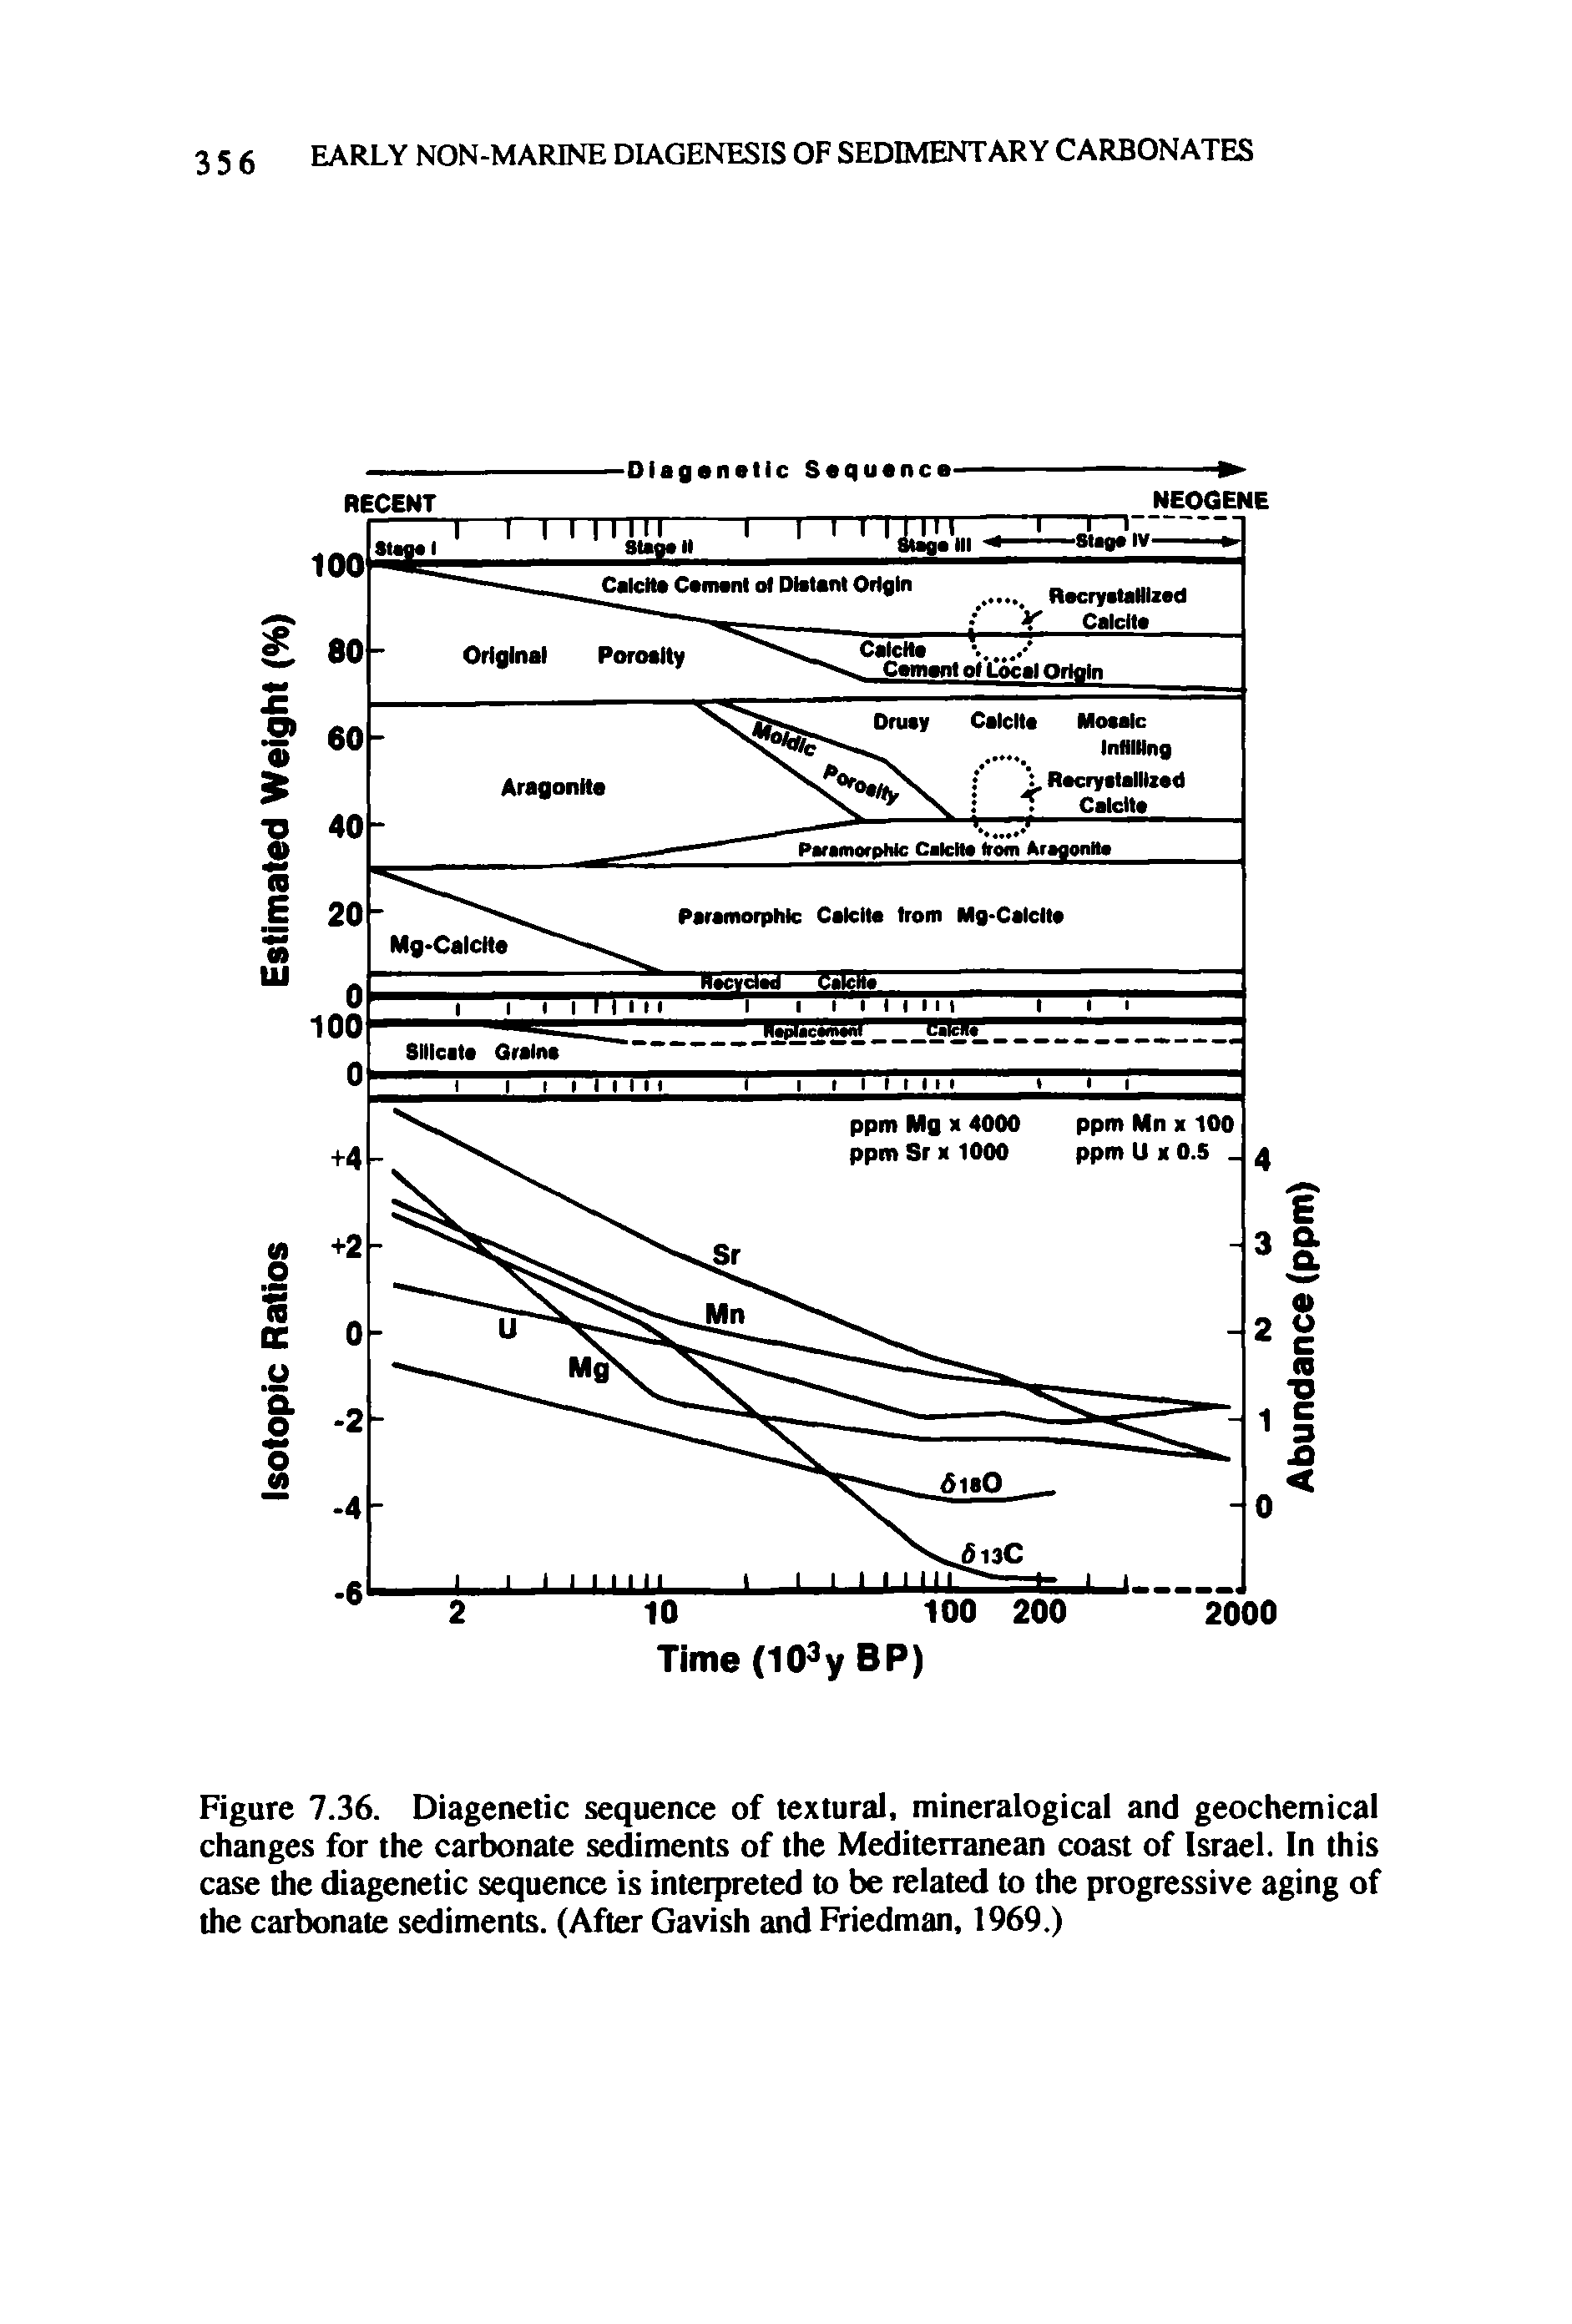 Figure 7.36. Diagenetic sequence of textural, mineralogical and geochemical changes for the carbonate sediments of the Mediterranean coast of Israel. In this case the diagenetic sequence is interpreted to be related to the progressive aging of the carbonate sediments. (After Gavish and Friedman, 1969.)...